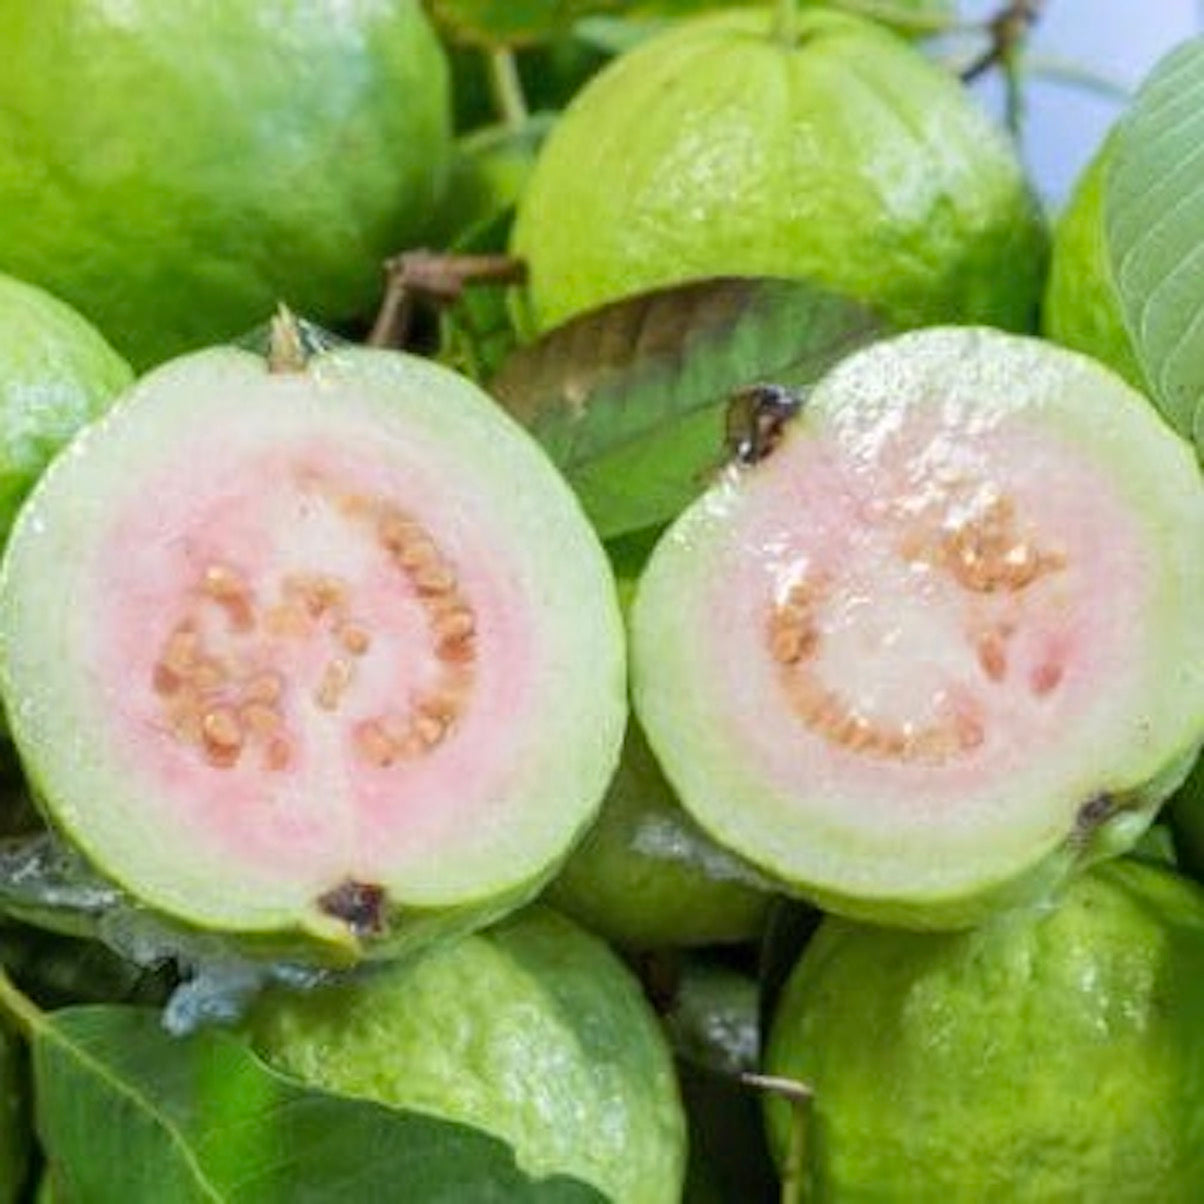 guava-online-grocery-supermarket-thenewgrocer-delivery-singapore